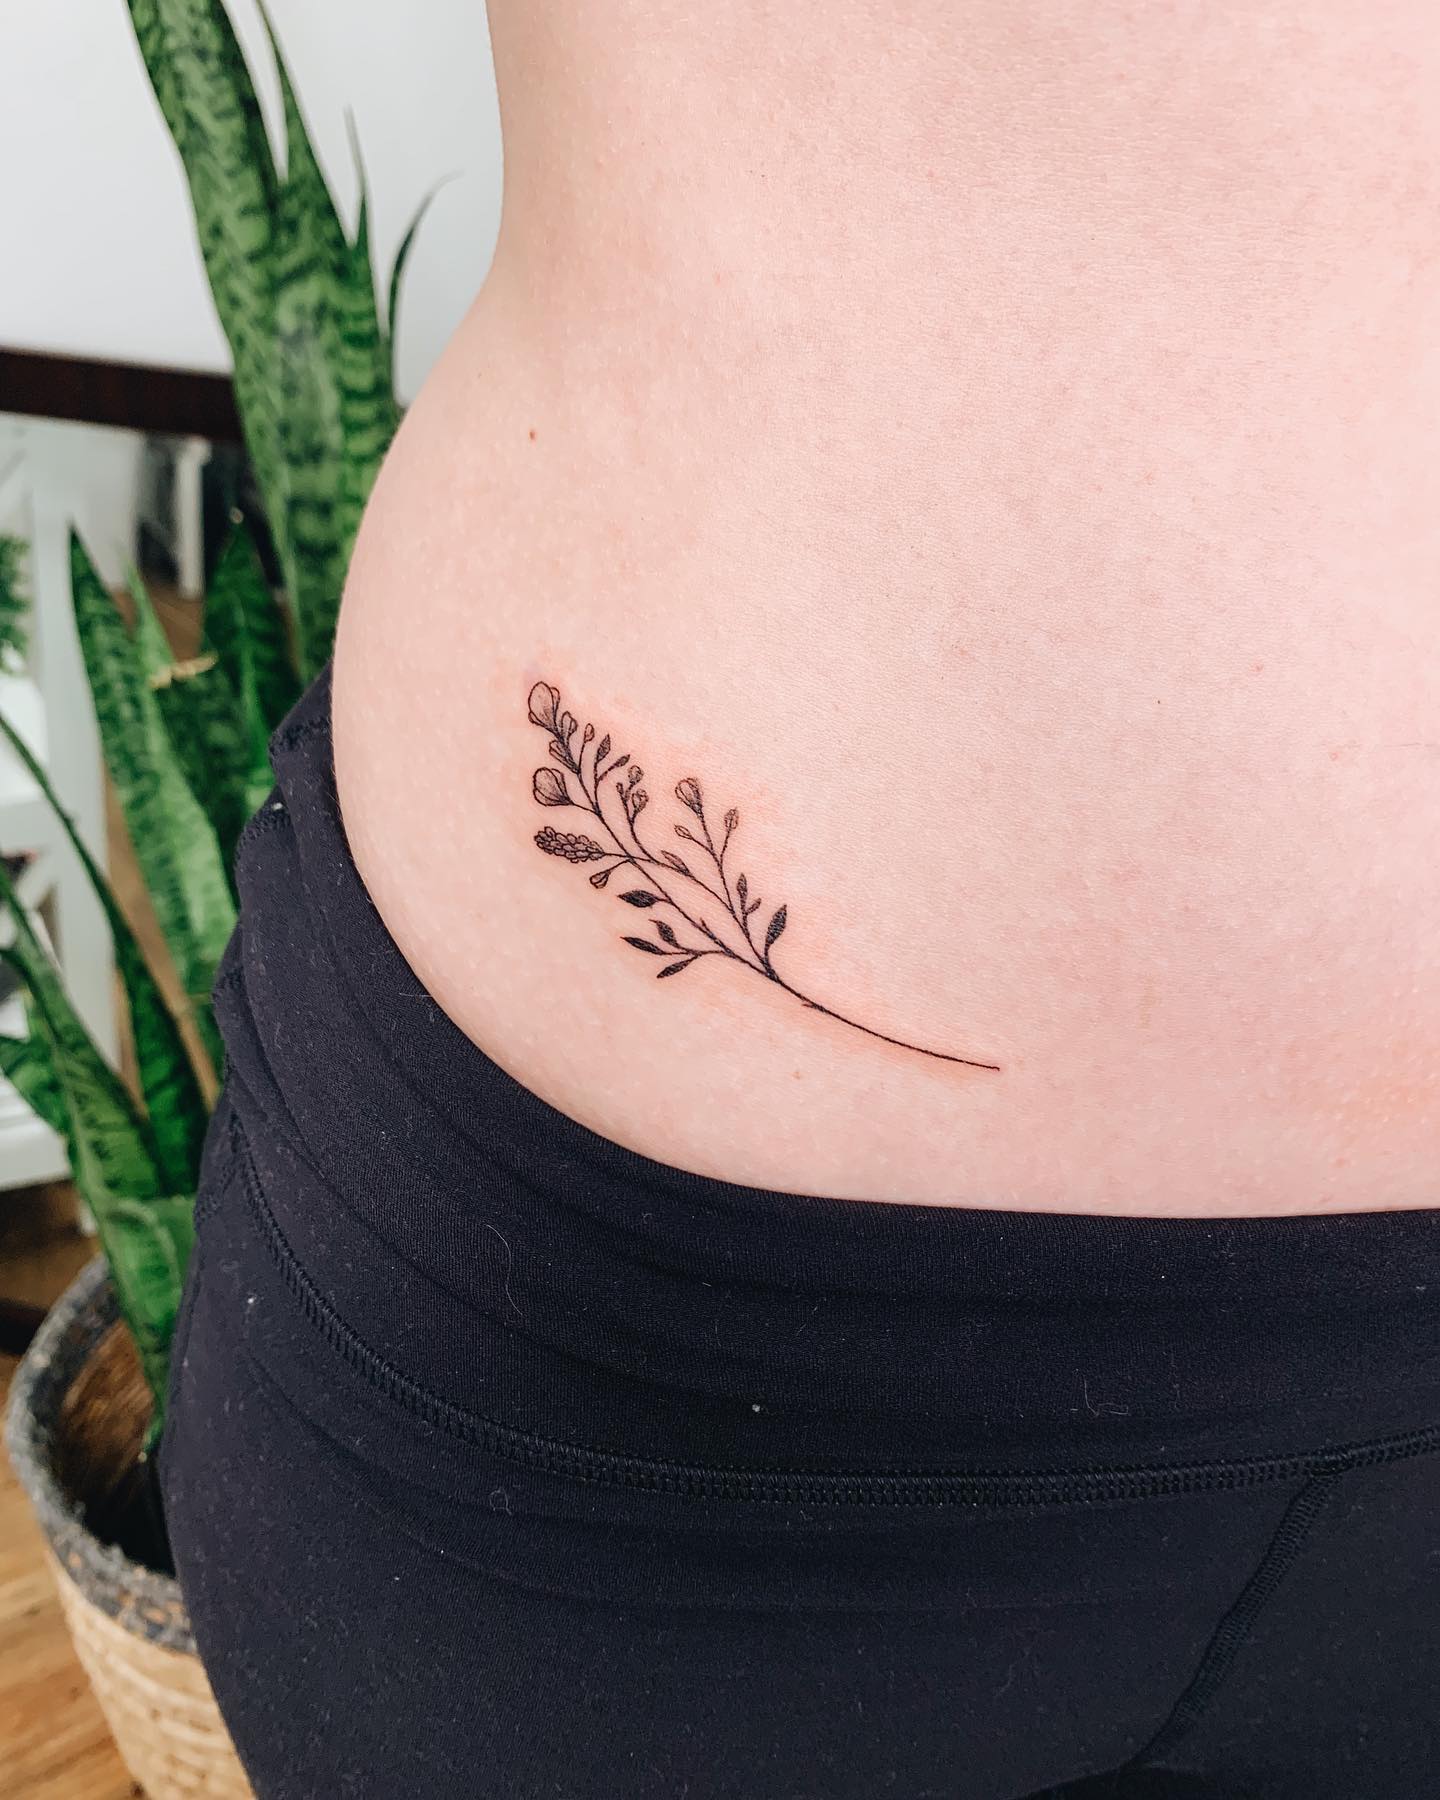 Show how real and close to nature you actually are with this small yet subtle and cute leaf hip design.